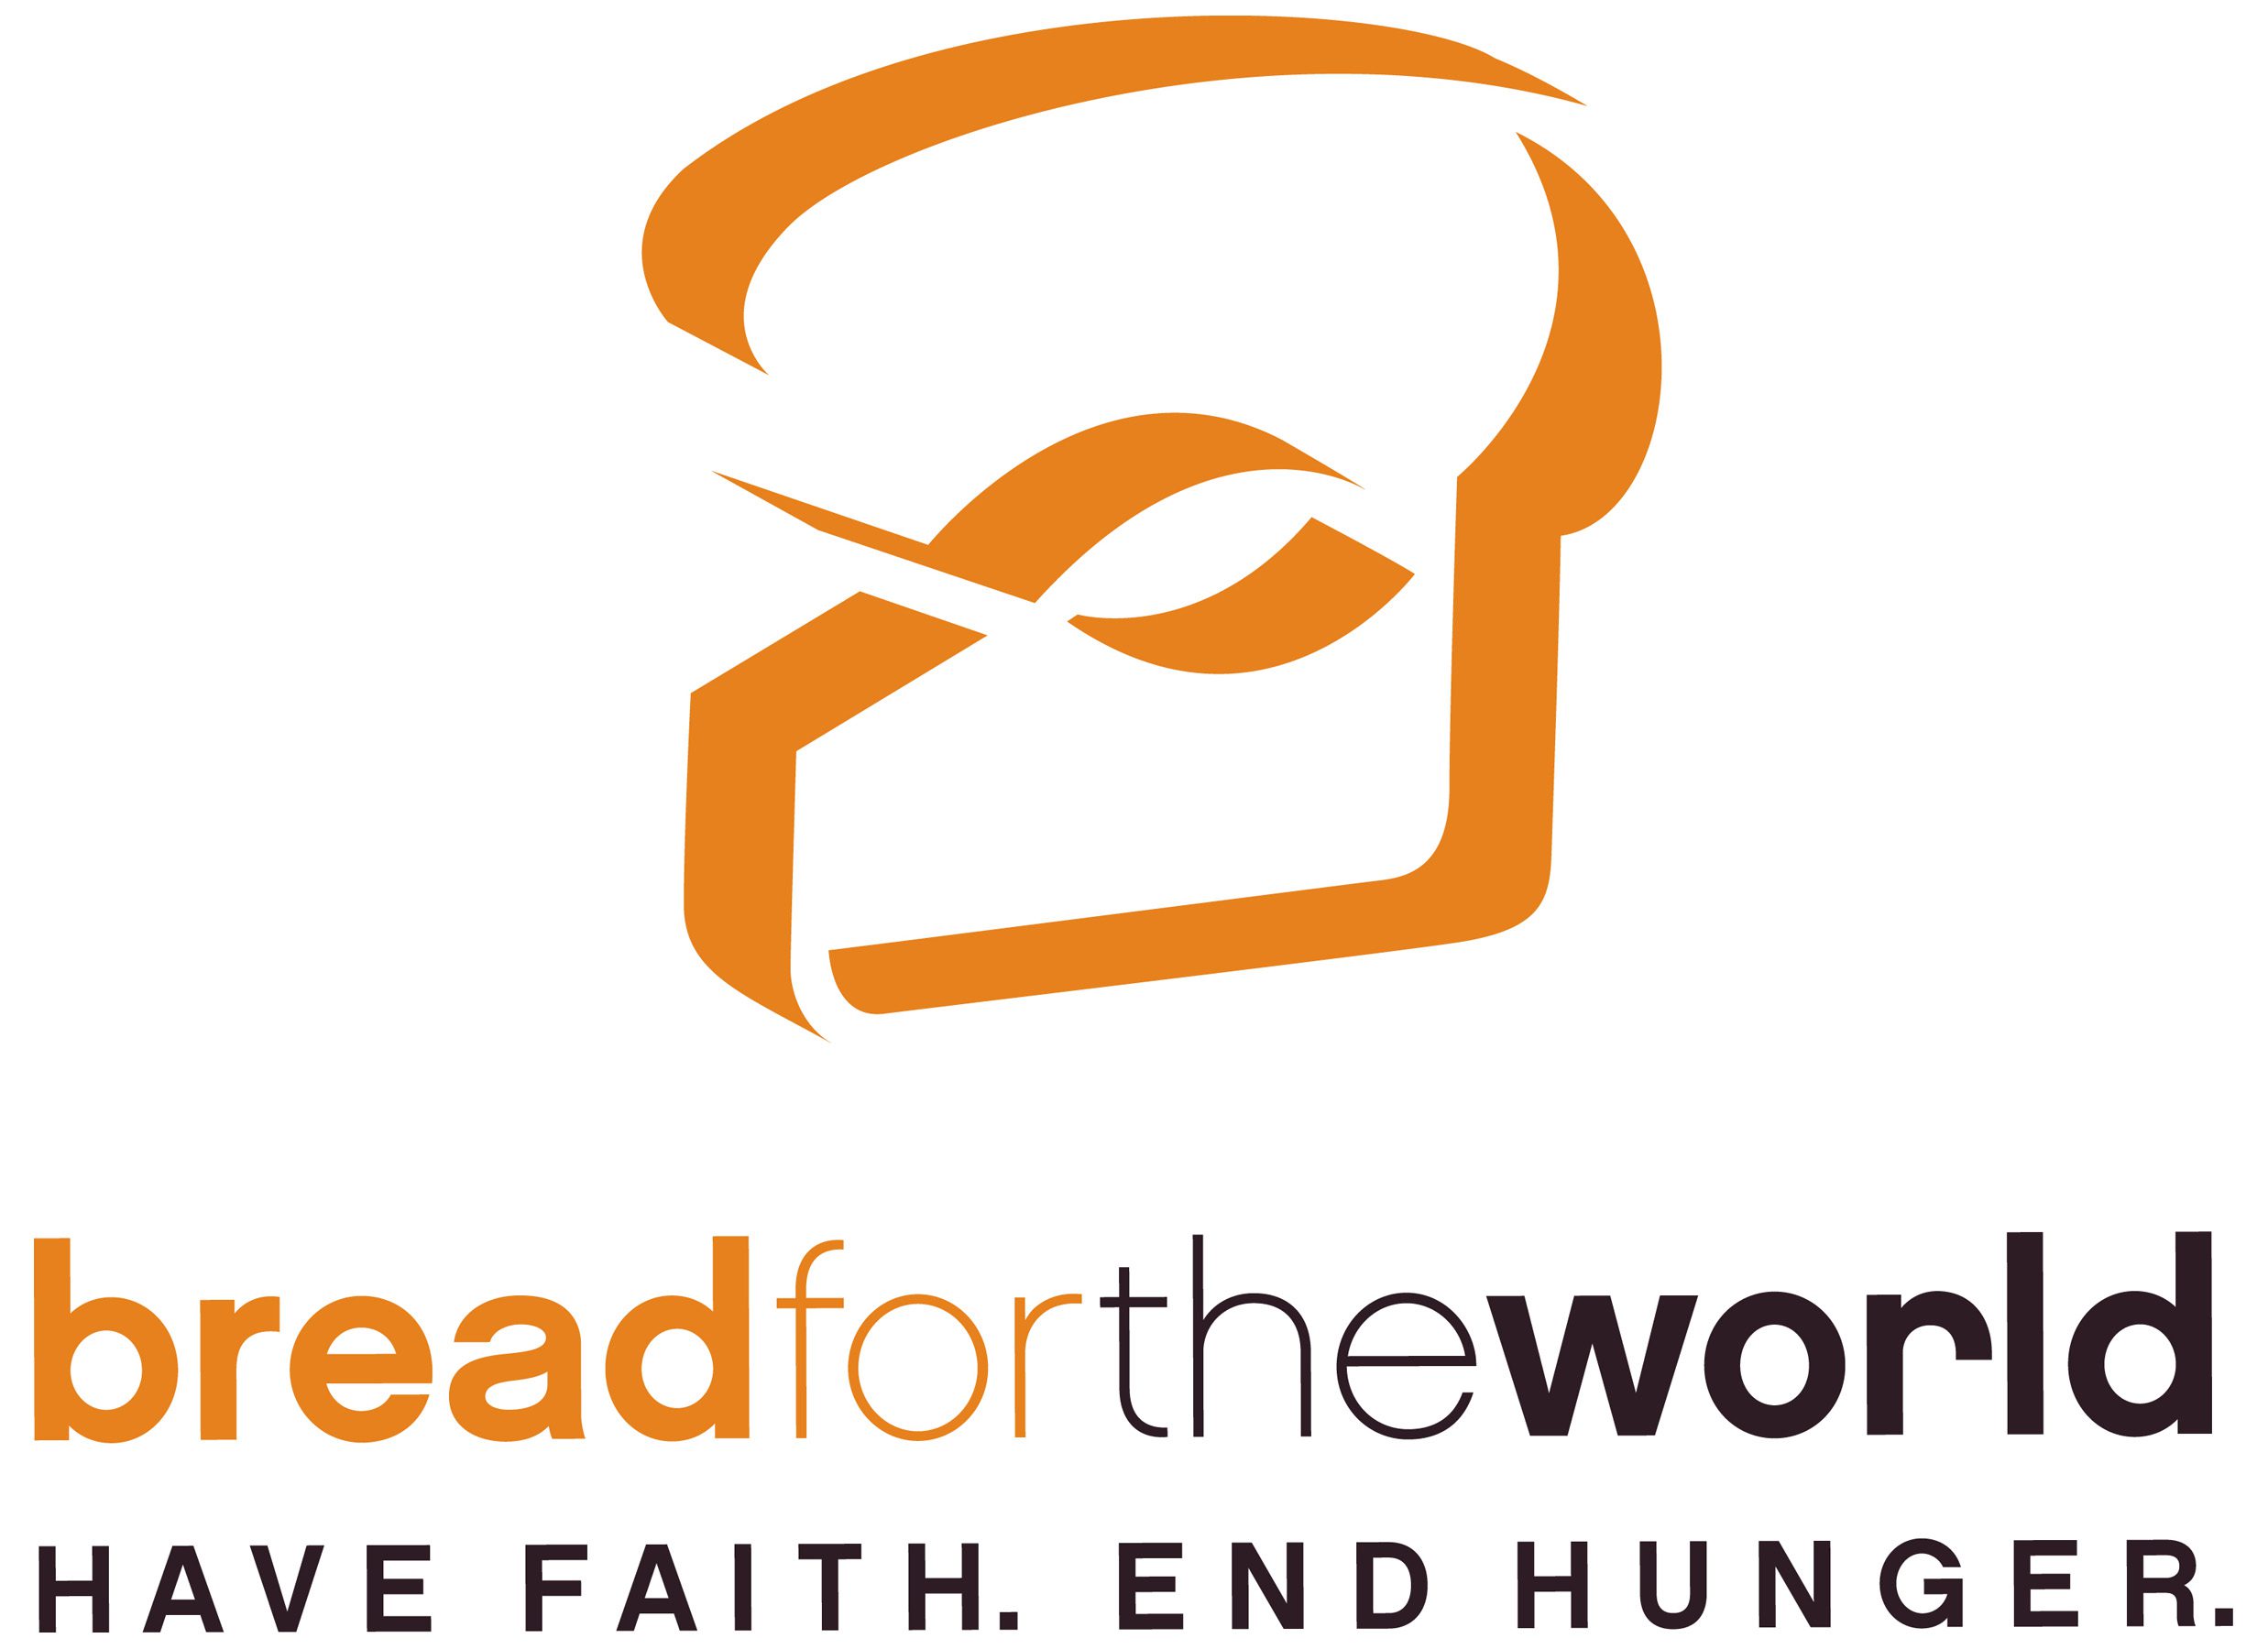 Bread for the World